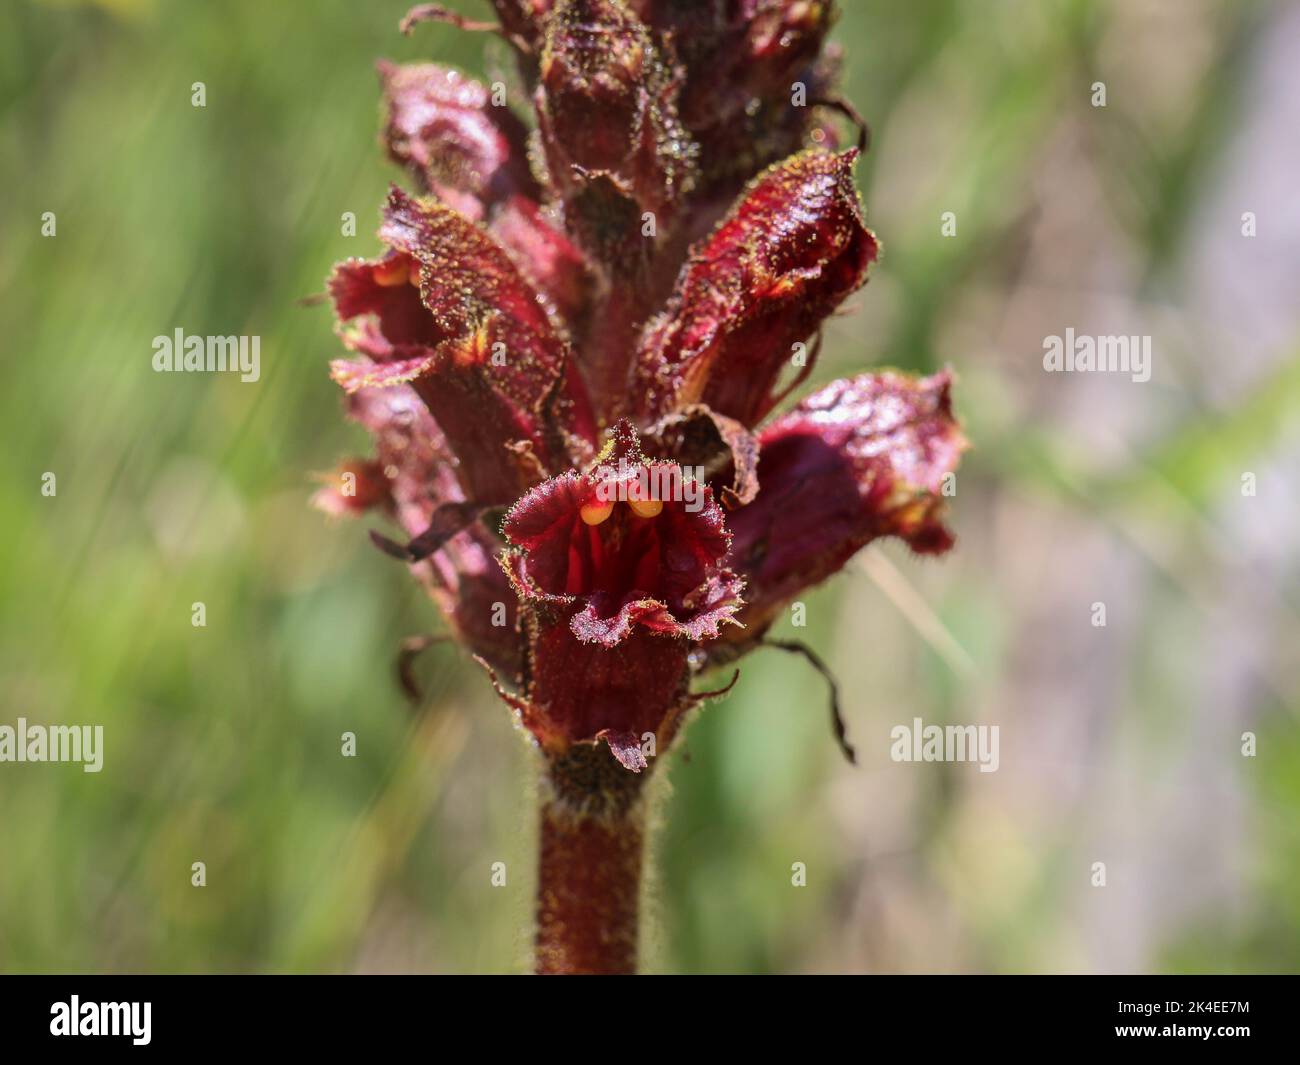 Dark red flowers of broomrape plant from genus Orobanche, a parasitic herbaceous plants Stock Photo